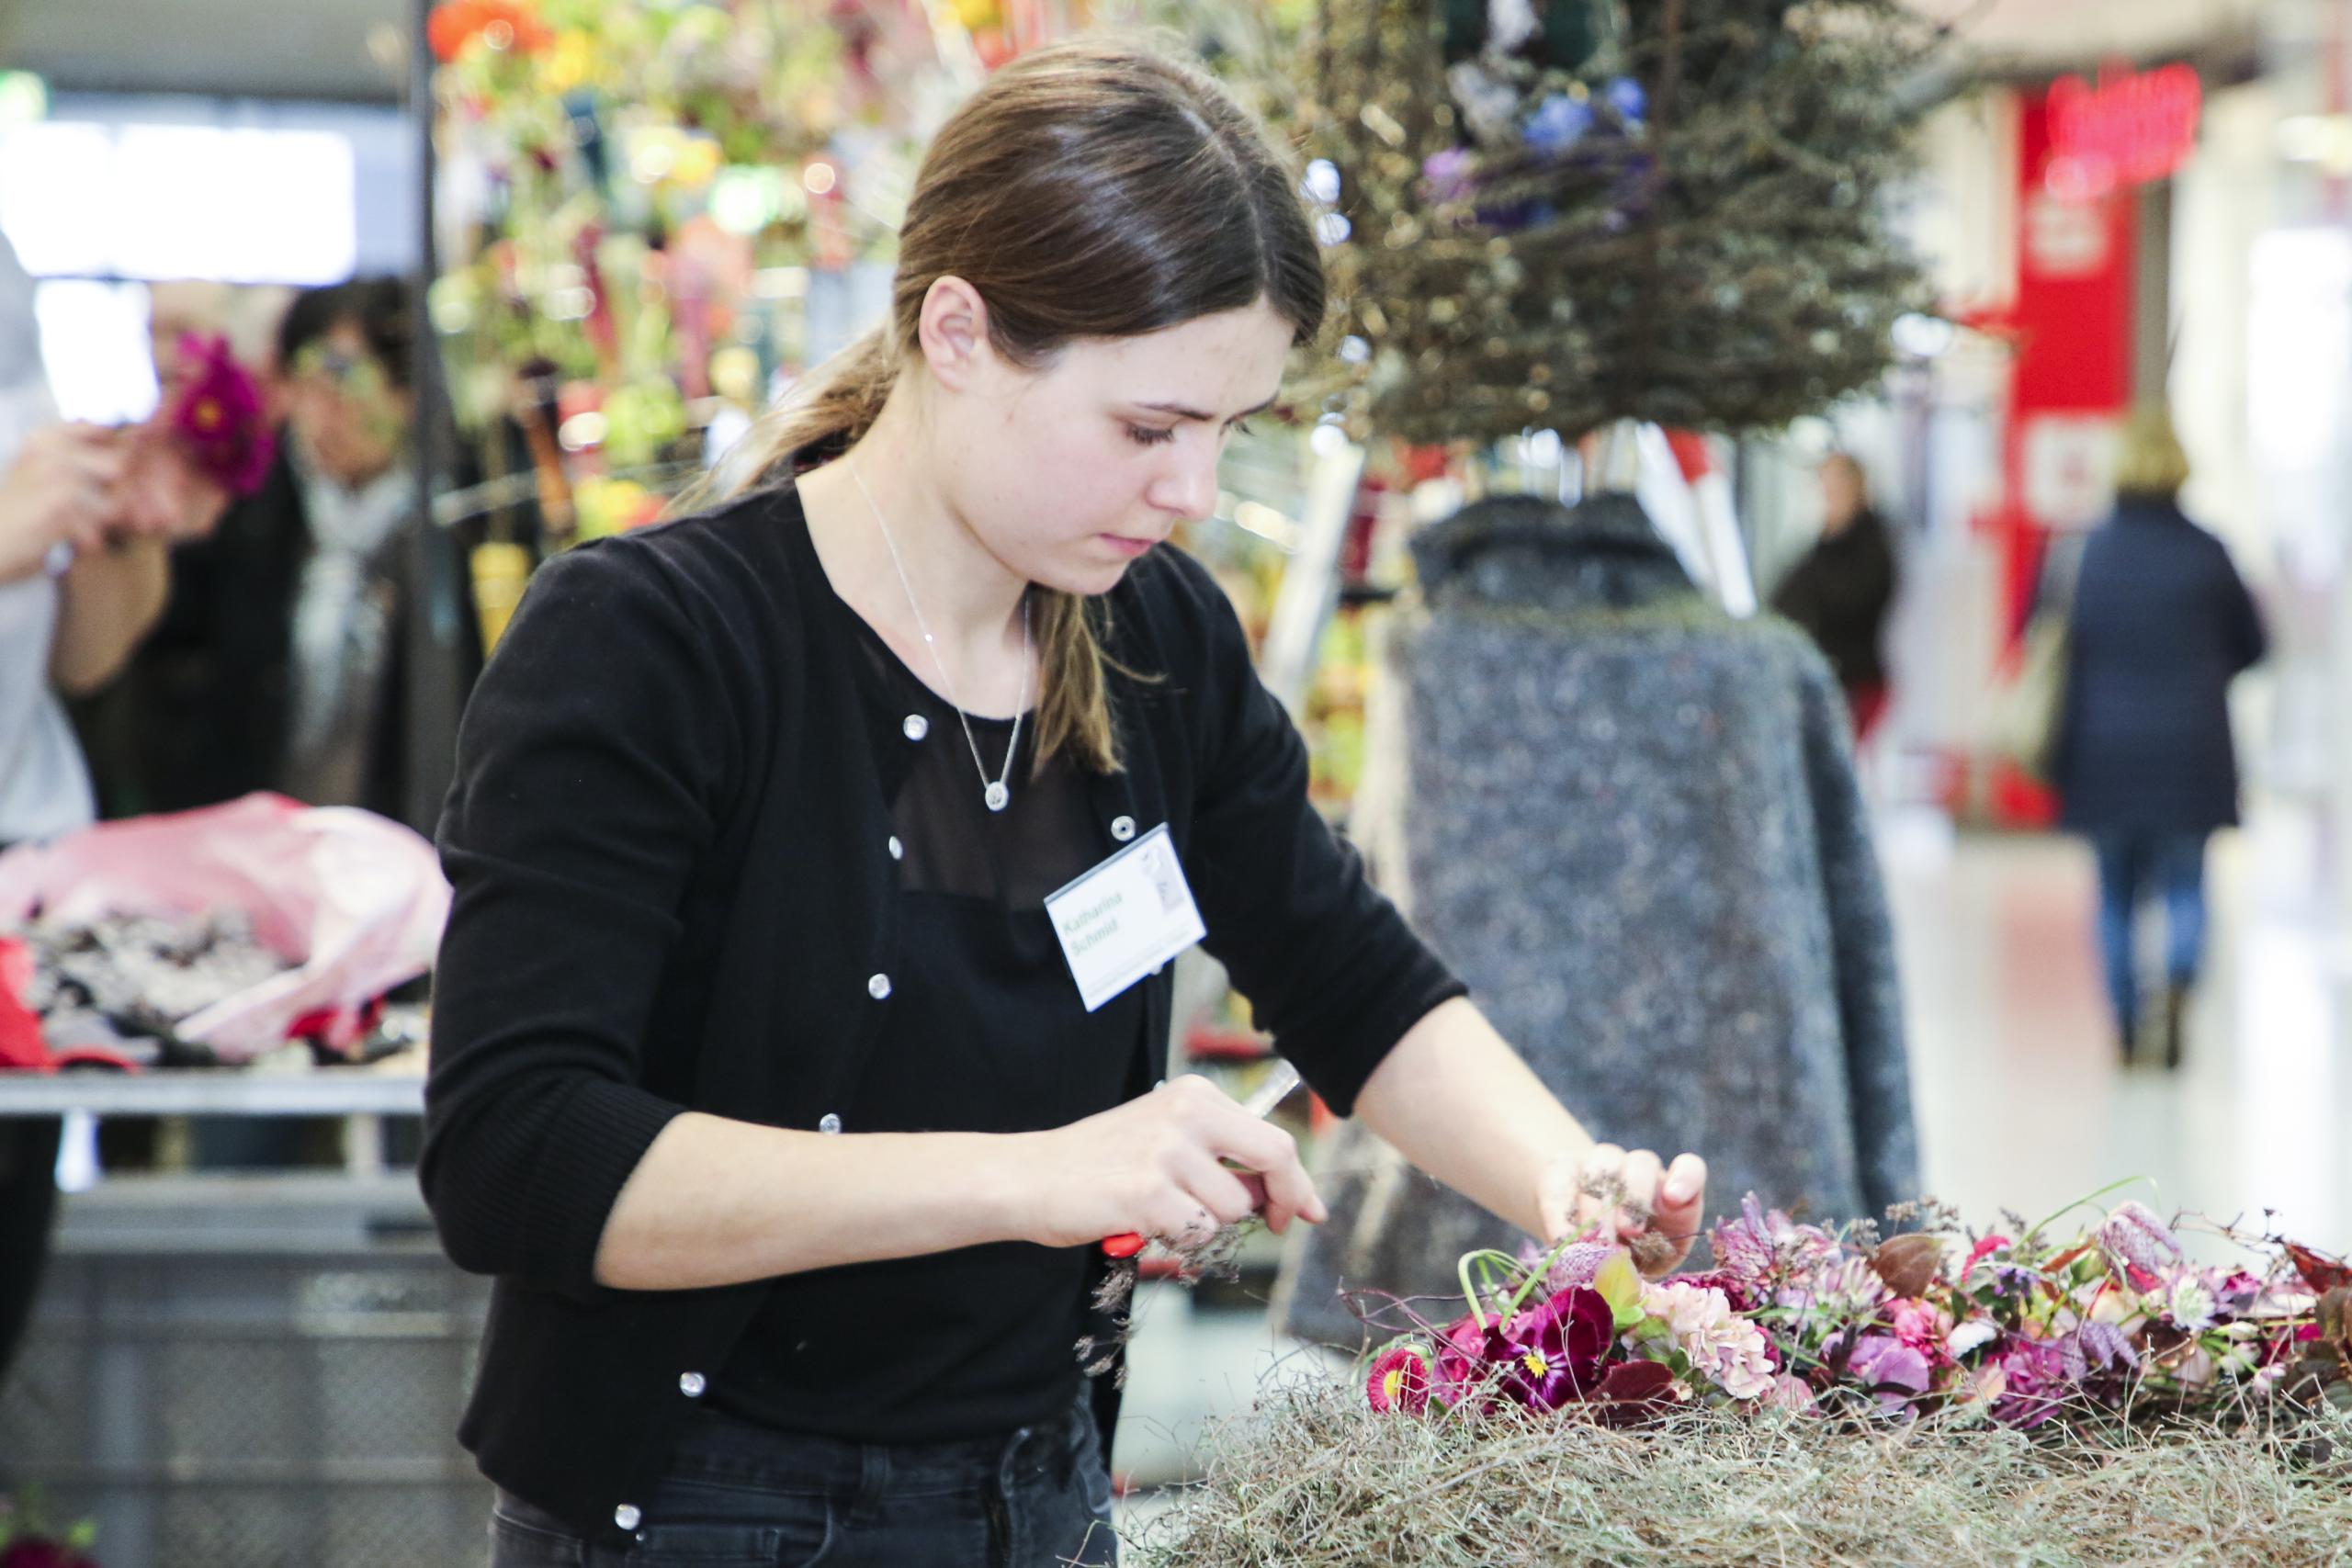 A florist is making her floral work. She ties pink flowers and bushes into a wreath.